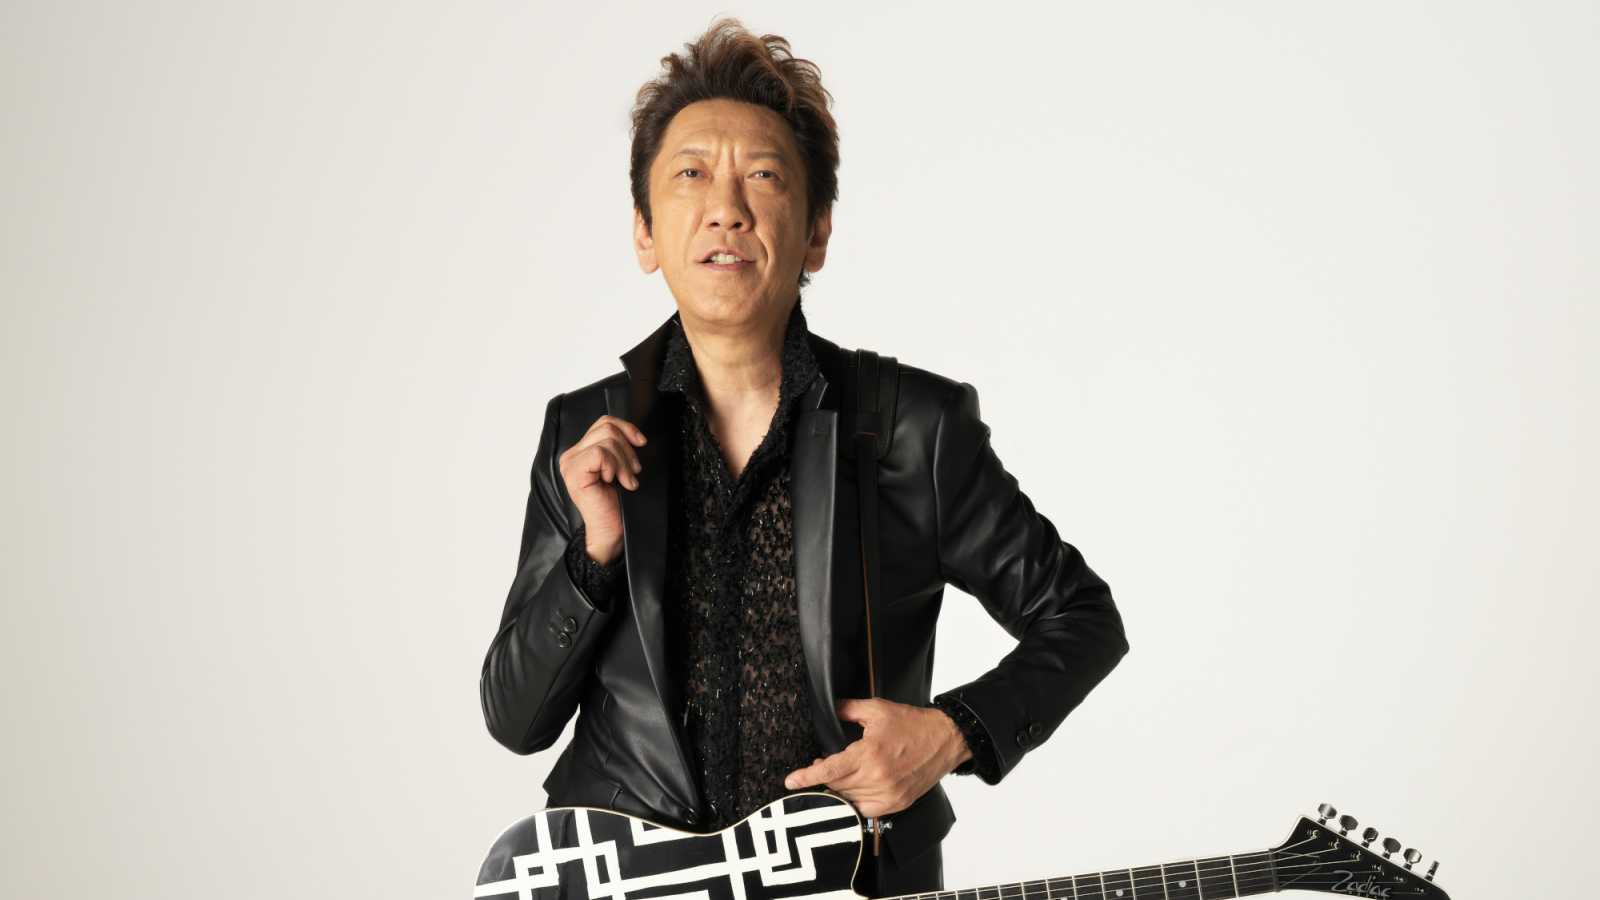 HOTEI © HOTEI. All rights reserved.